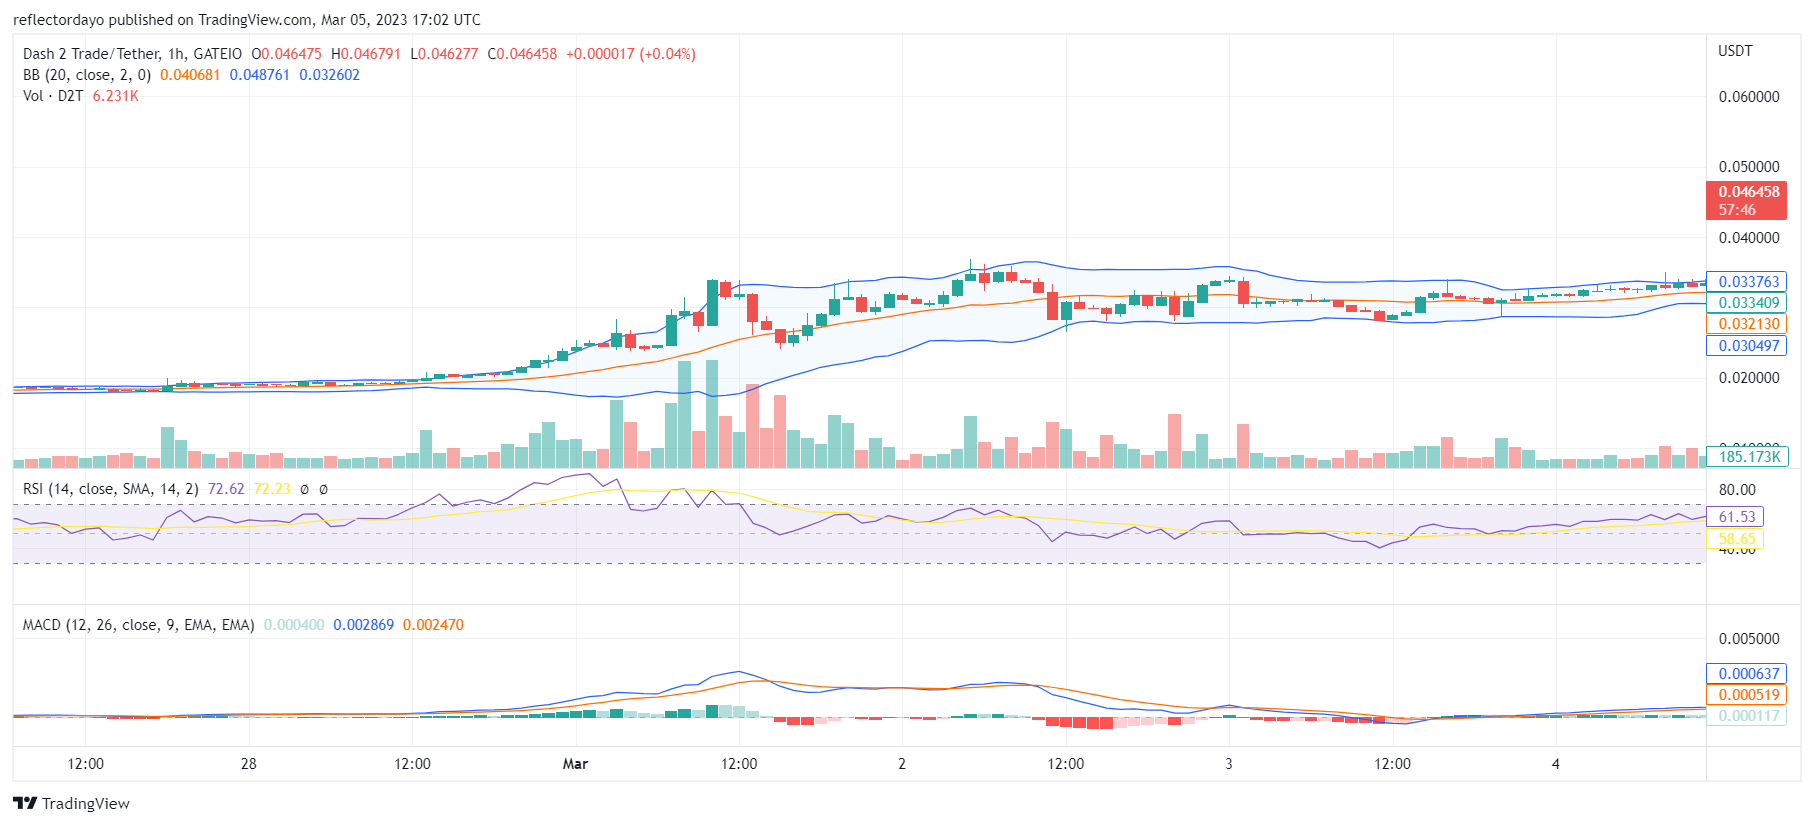 Dash 2 Trade (D2T) Bullish Trend Resumes; The Resistance Level Is Under Pressure